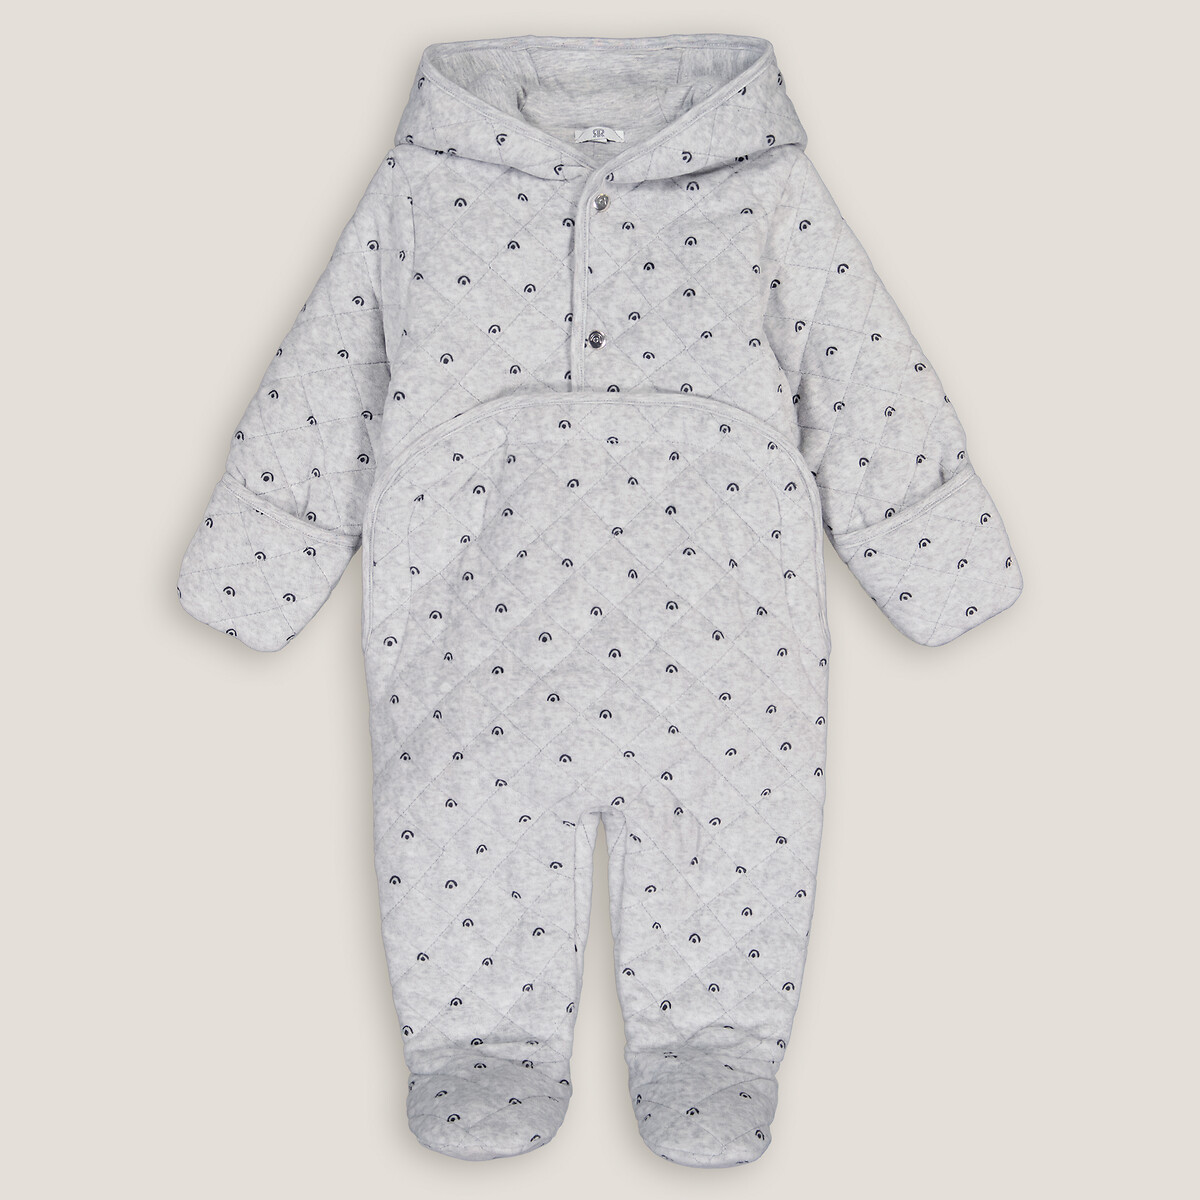 Printed Velour Hooded Pramsuit in Cotton Mix, 1 Month-18 Months